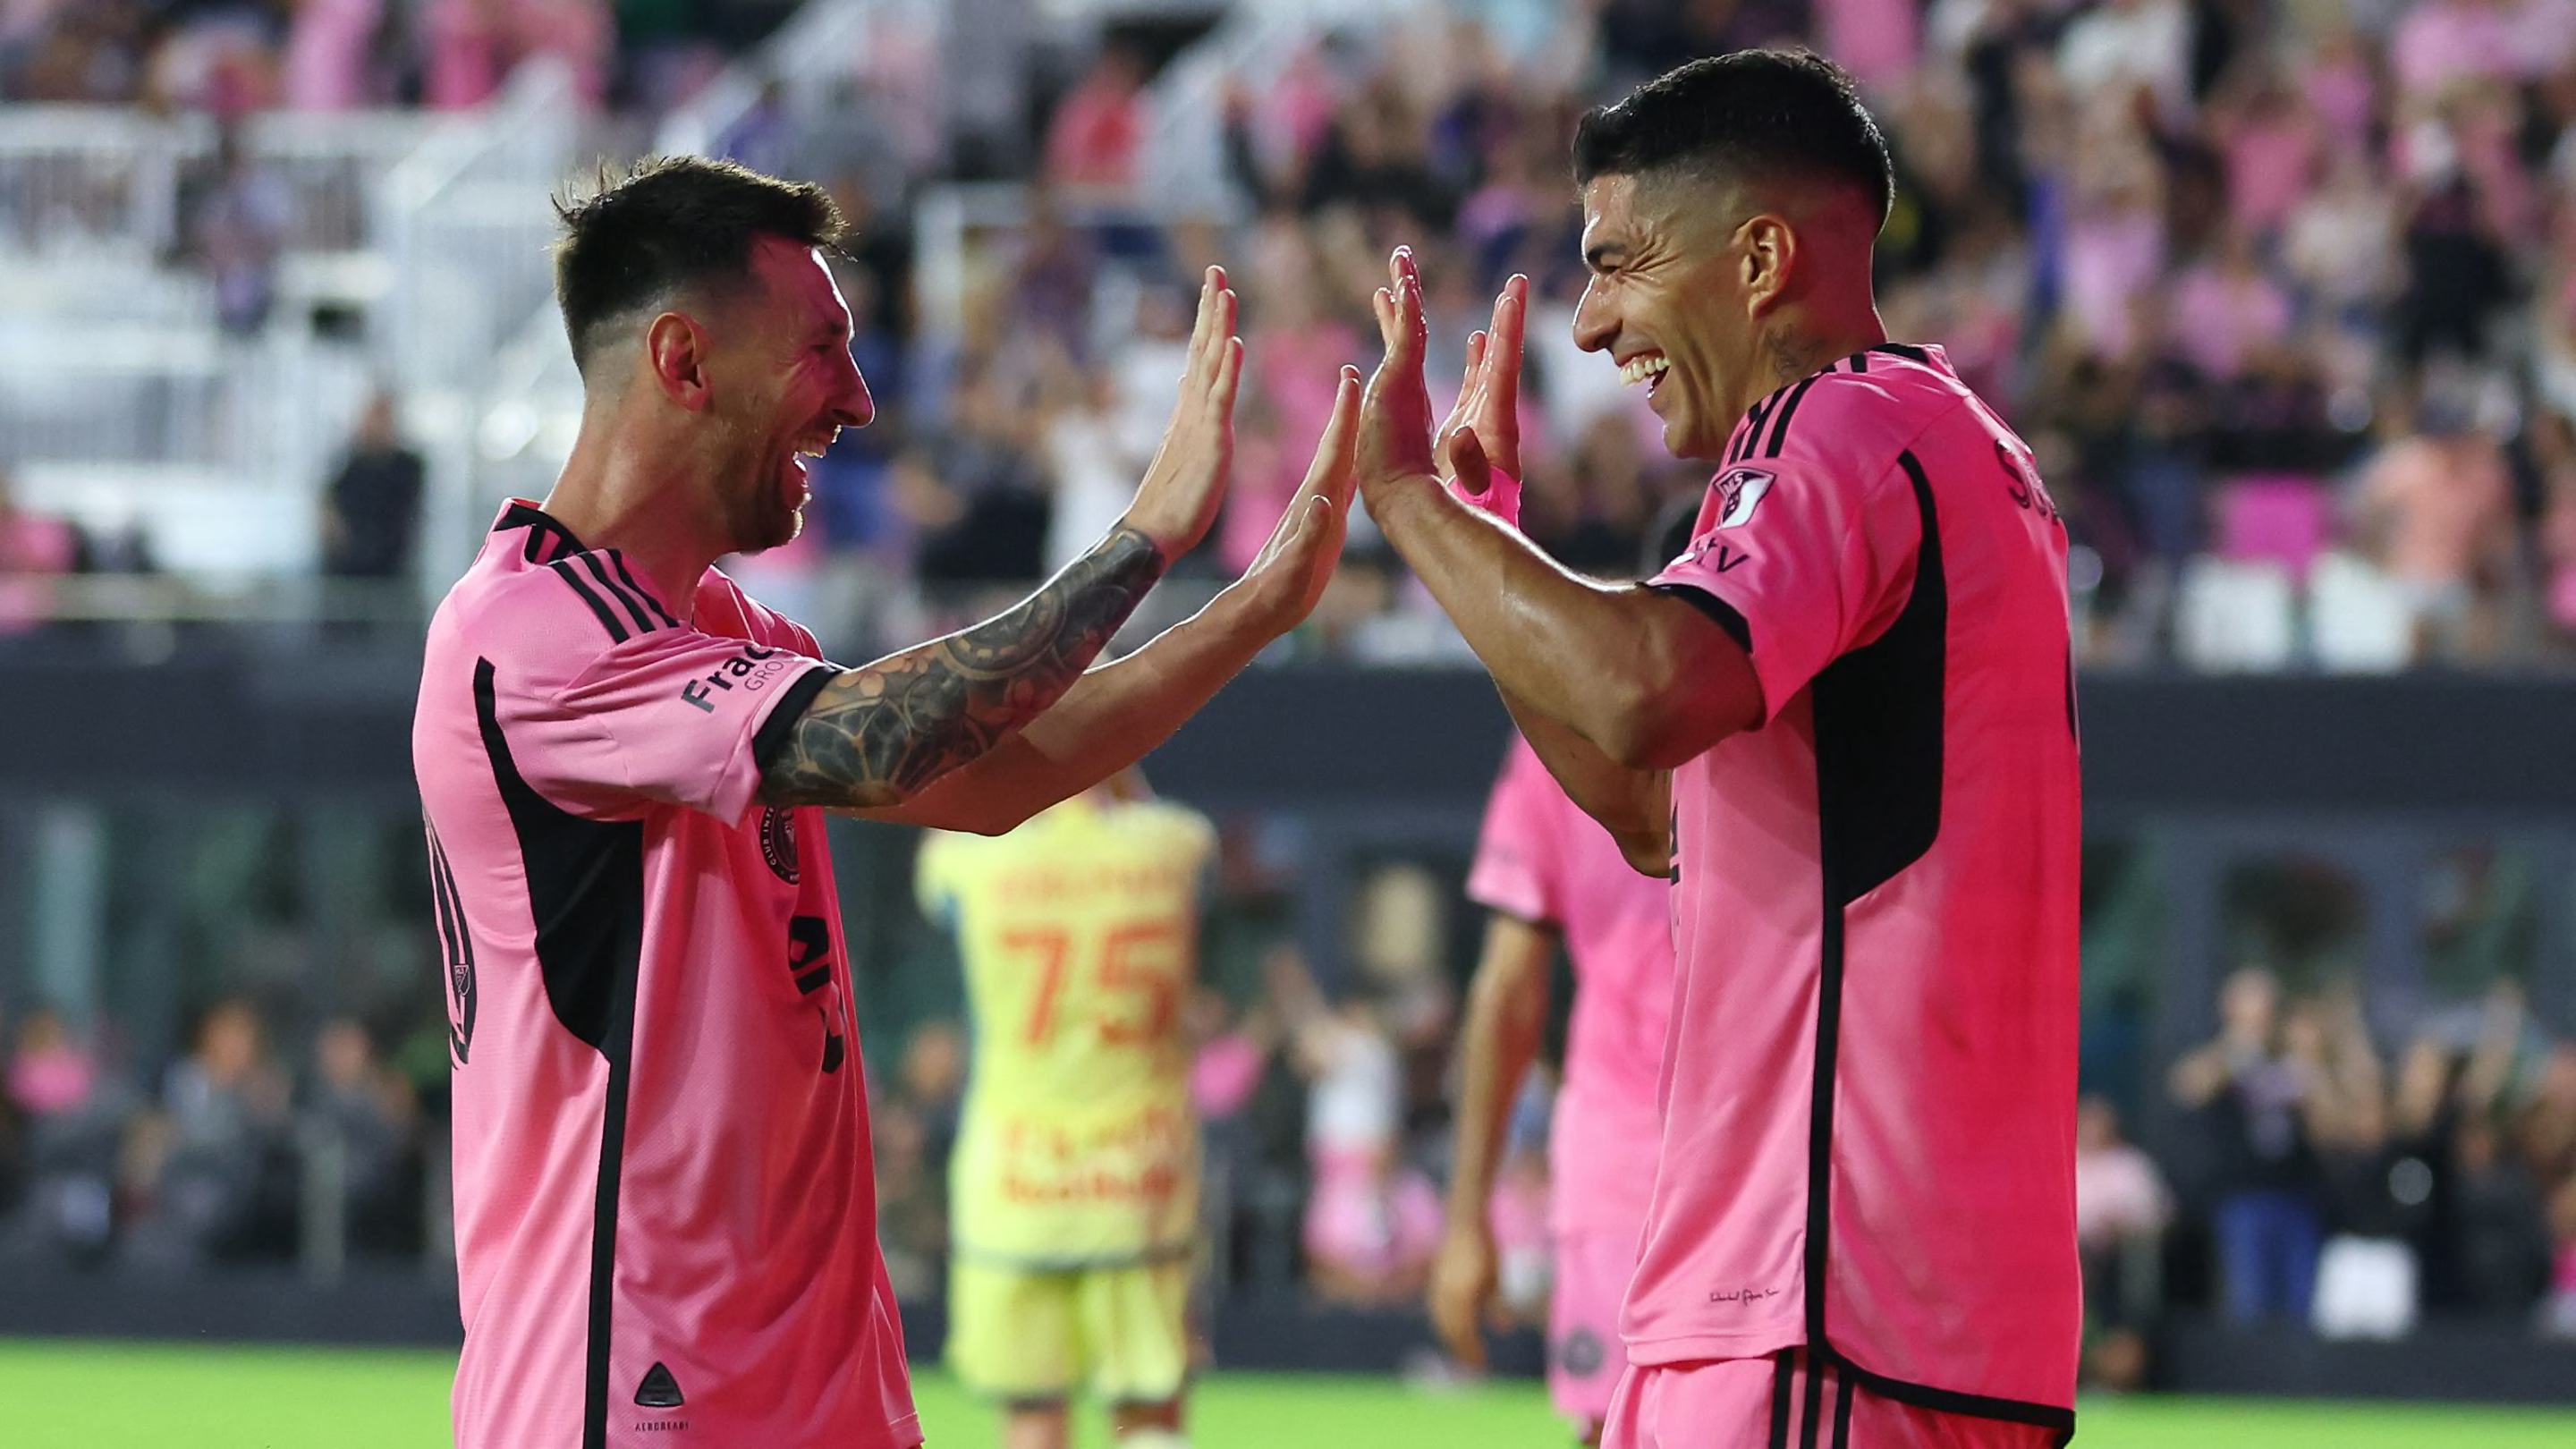 Lionel Messi shatters MLS record in Inter Miami’s resounding victory over Red Bulls